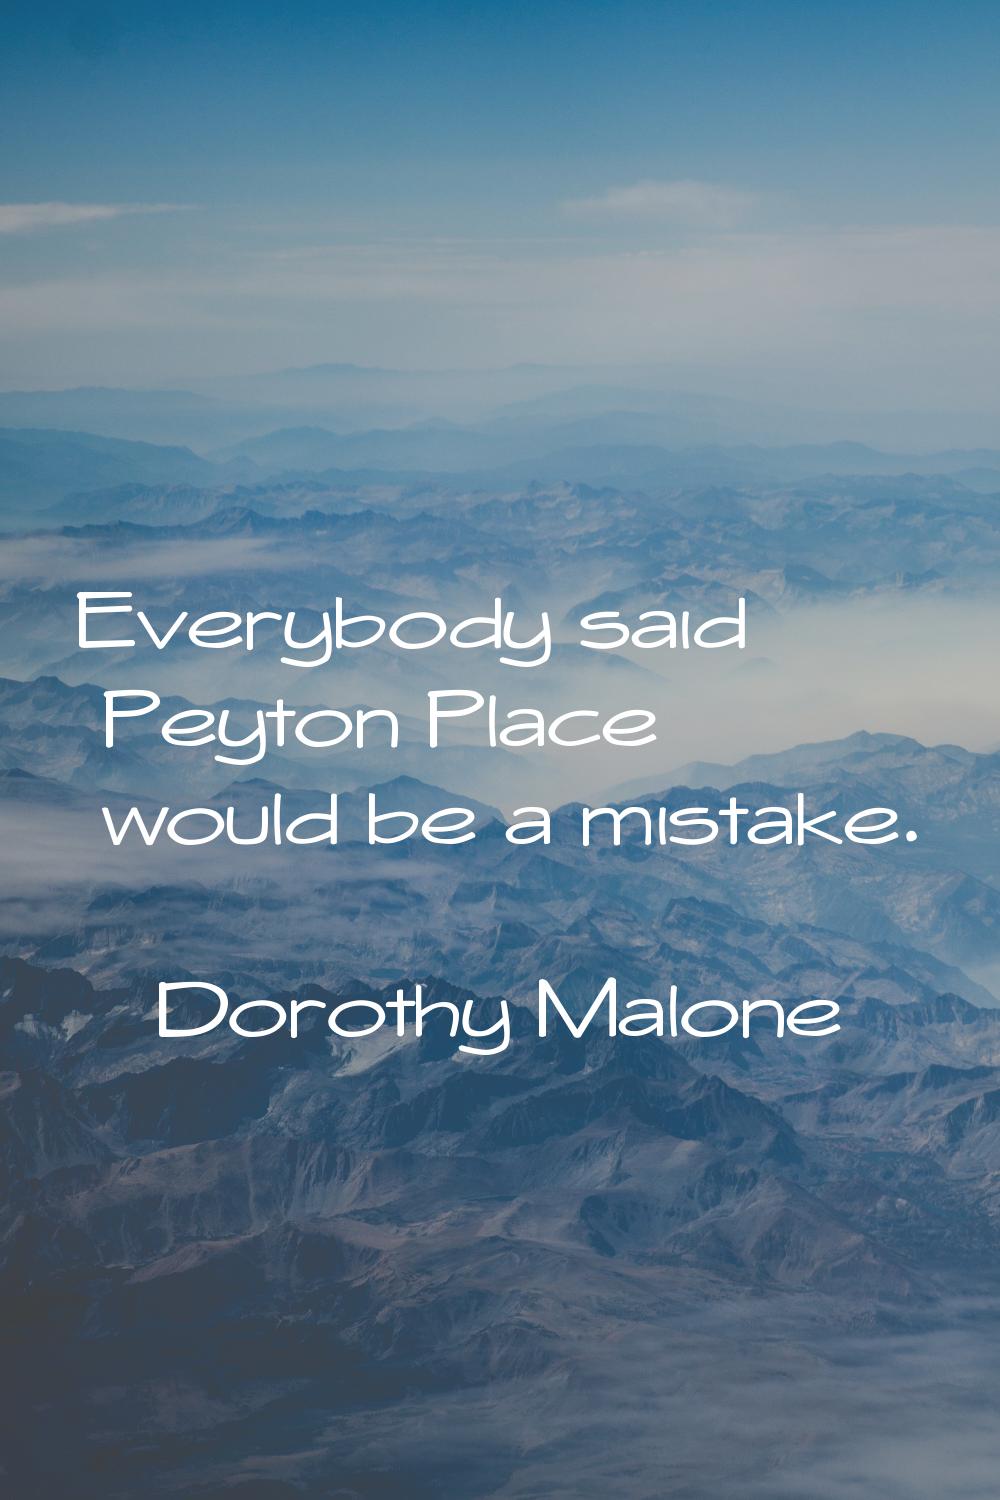 Everybody said Peyton Place would be a mistake.